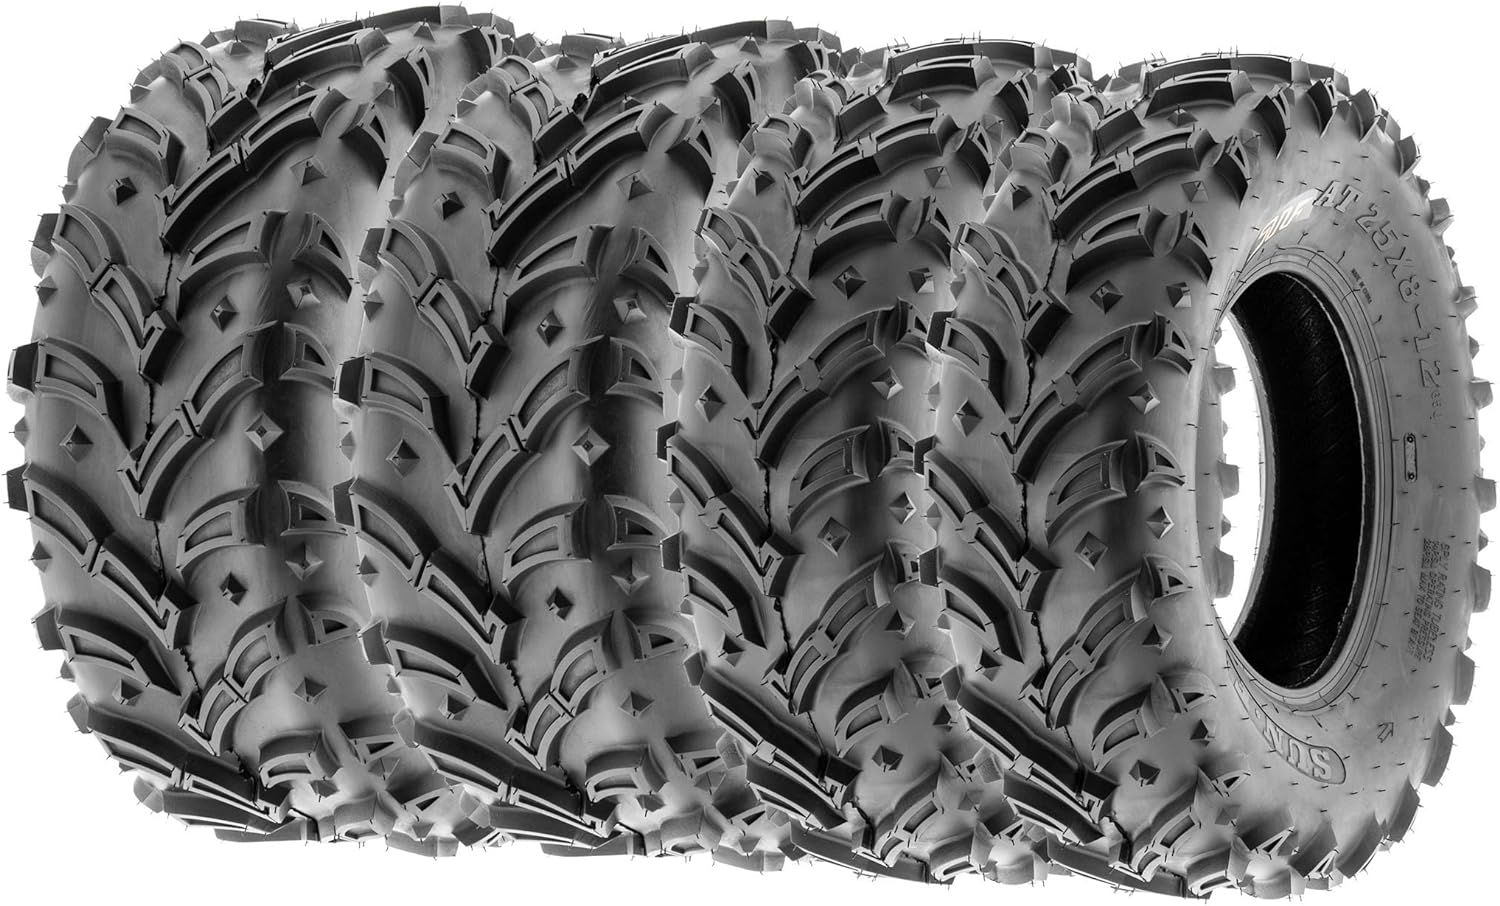 Are These the Best Sunf Tires for Your UTV: Discover the Top Sunf 27x9x12 Tires